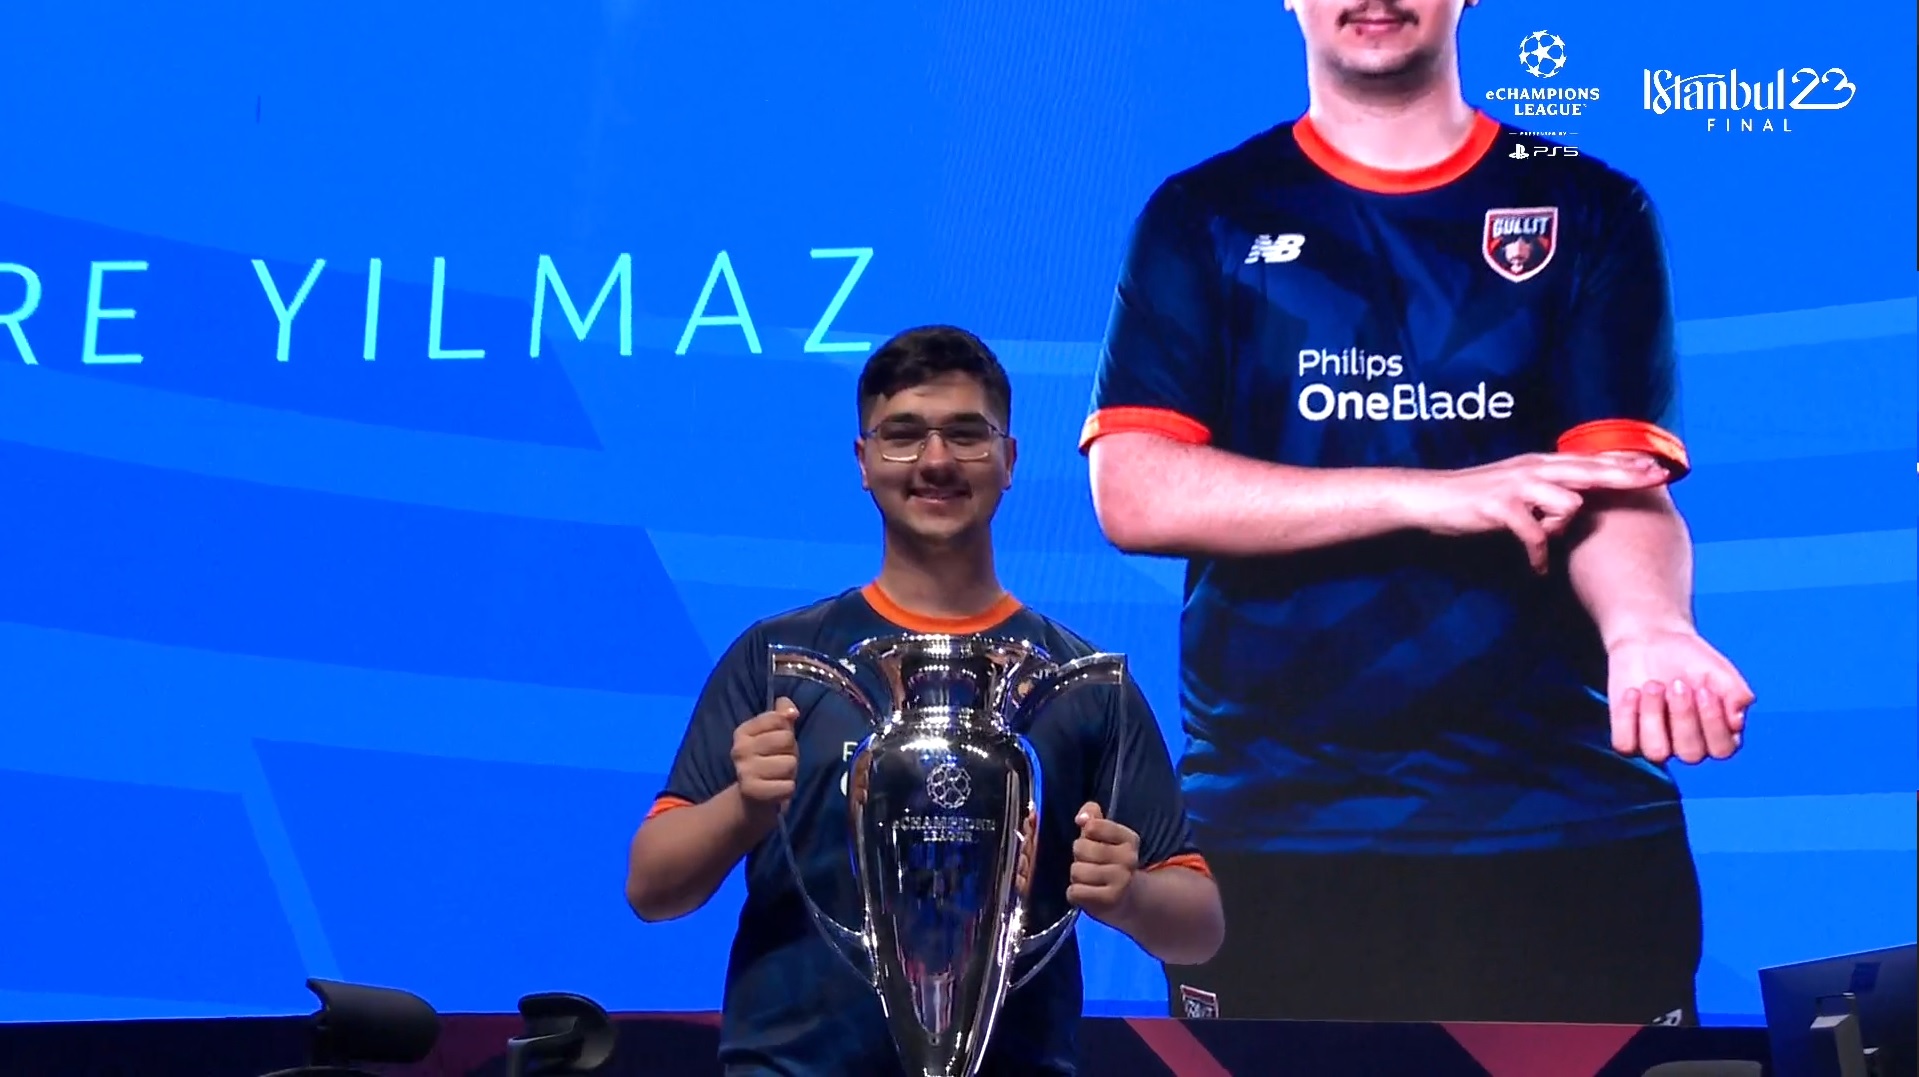 FIFA 23 hosts an event dedicated to European competitions. FIFA news -  eSports events review, analytics, announcements, interviews, statistics -  FFuhcHwTM